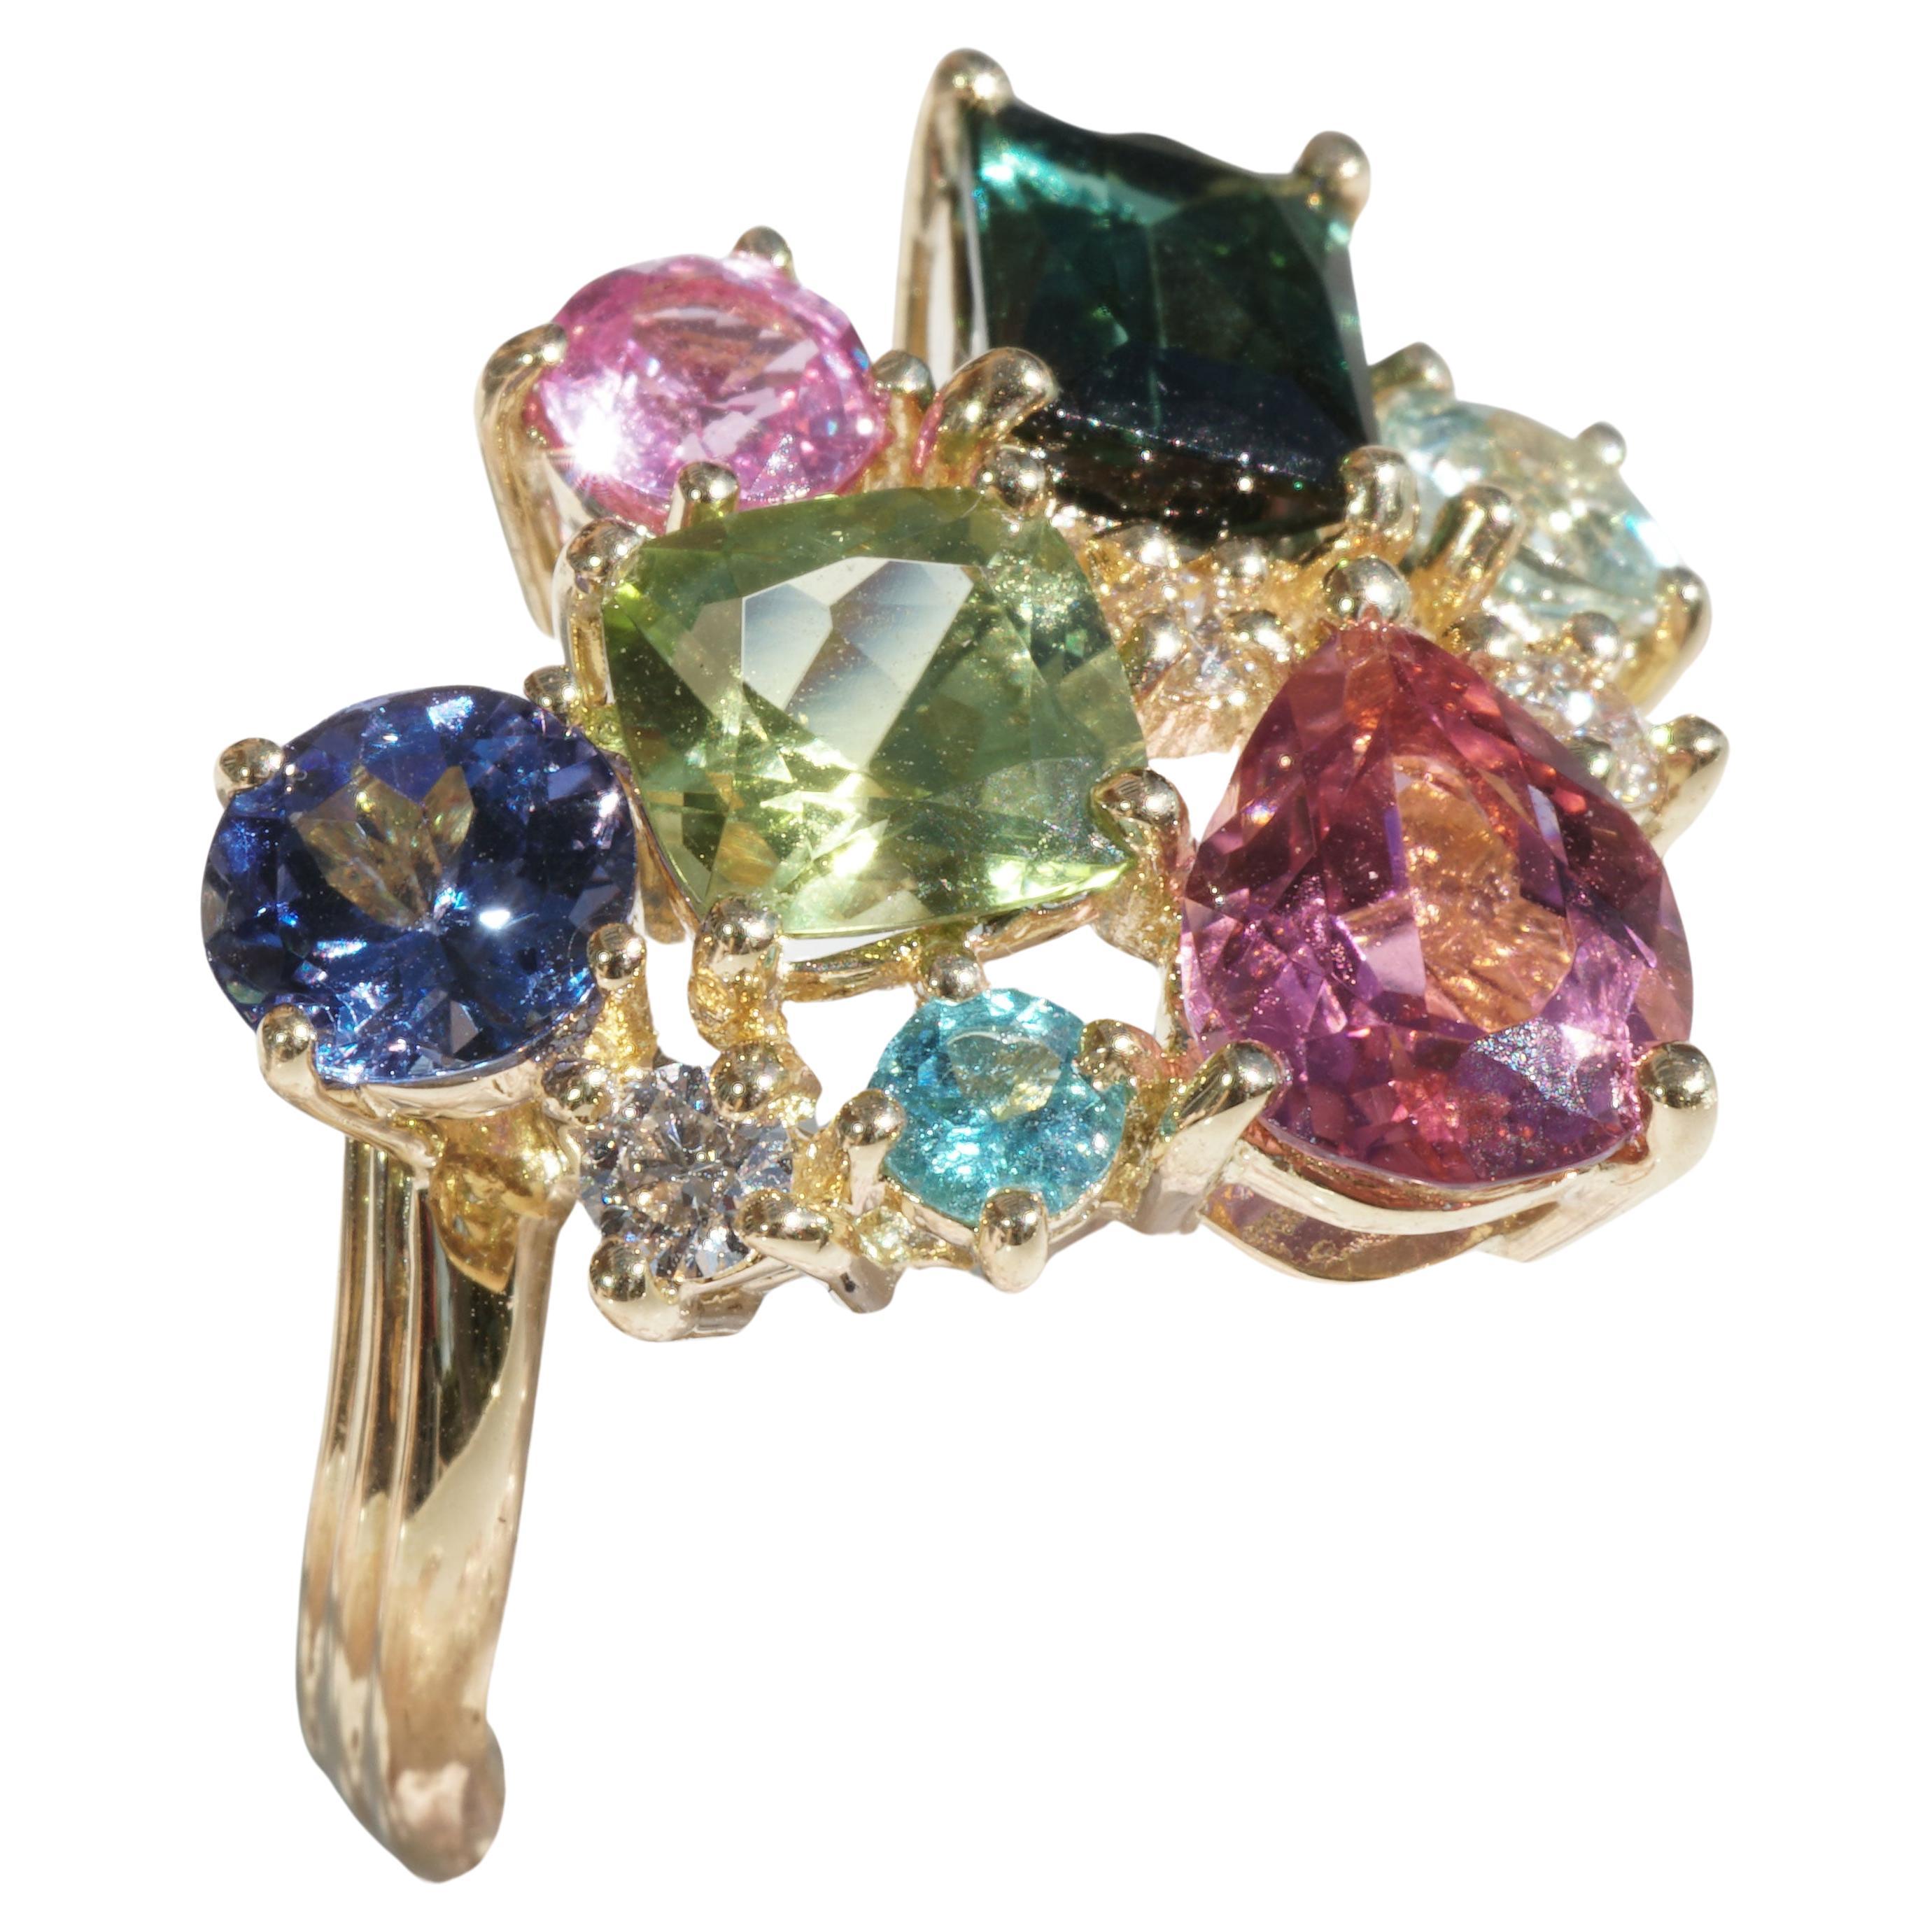 Ring 18 kt Yellow Gold
in this ring the best gemstones were combined a potpourri of colors and gemstones pink tourmaline, green-yellow peridot, blue-green indigolite, light green tourmaline, light blue zircon, purple zoisite, total 3. 99 ct, all